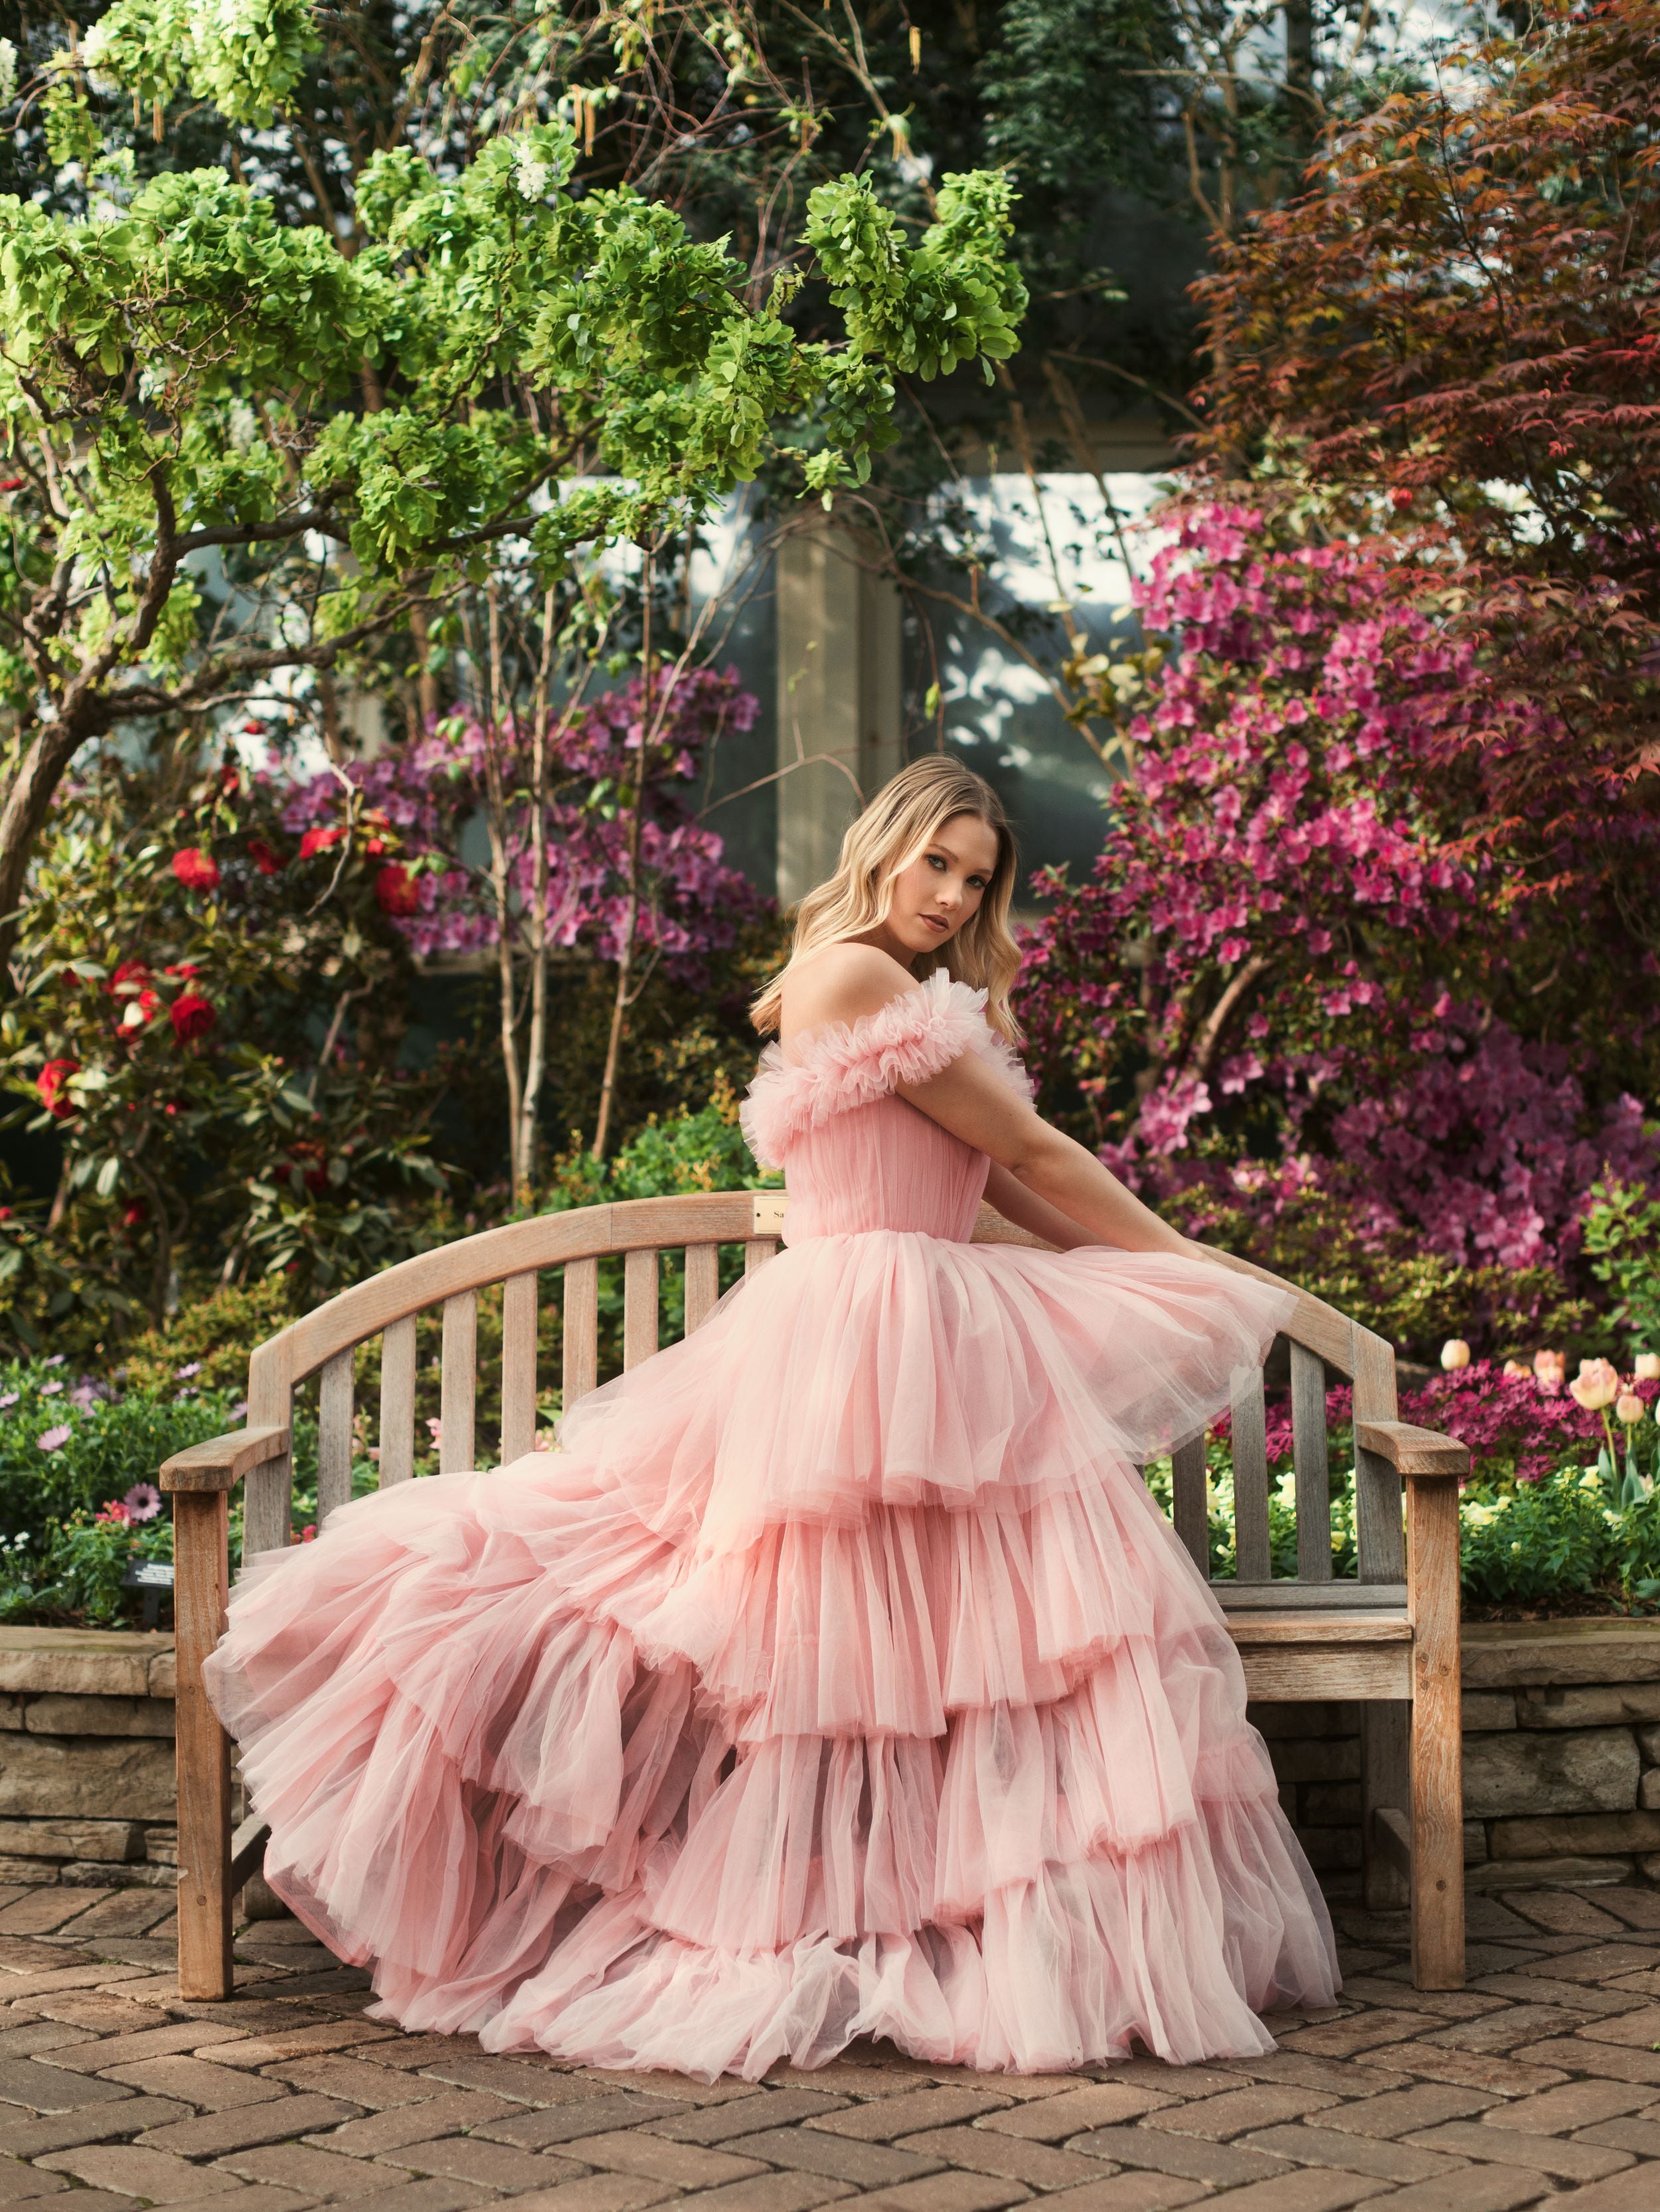 Off-the-Shoulder High-Low Tulle Gown